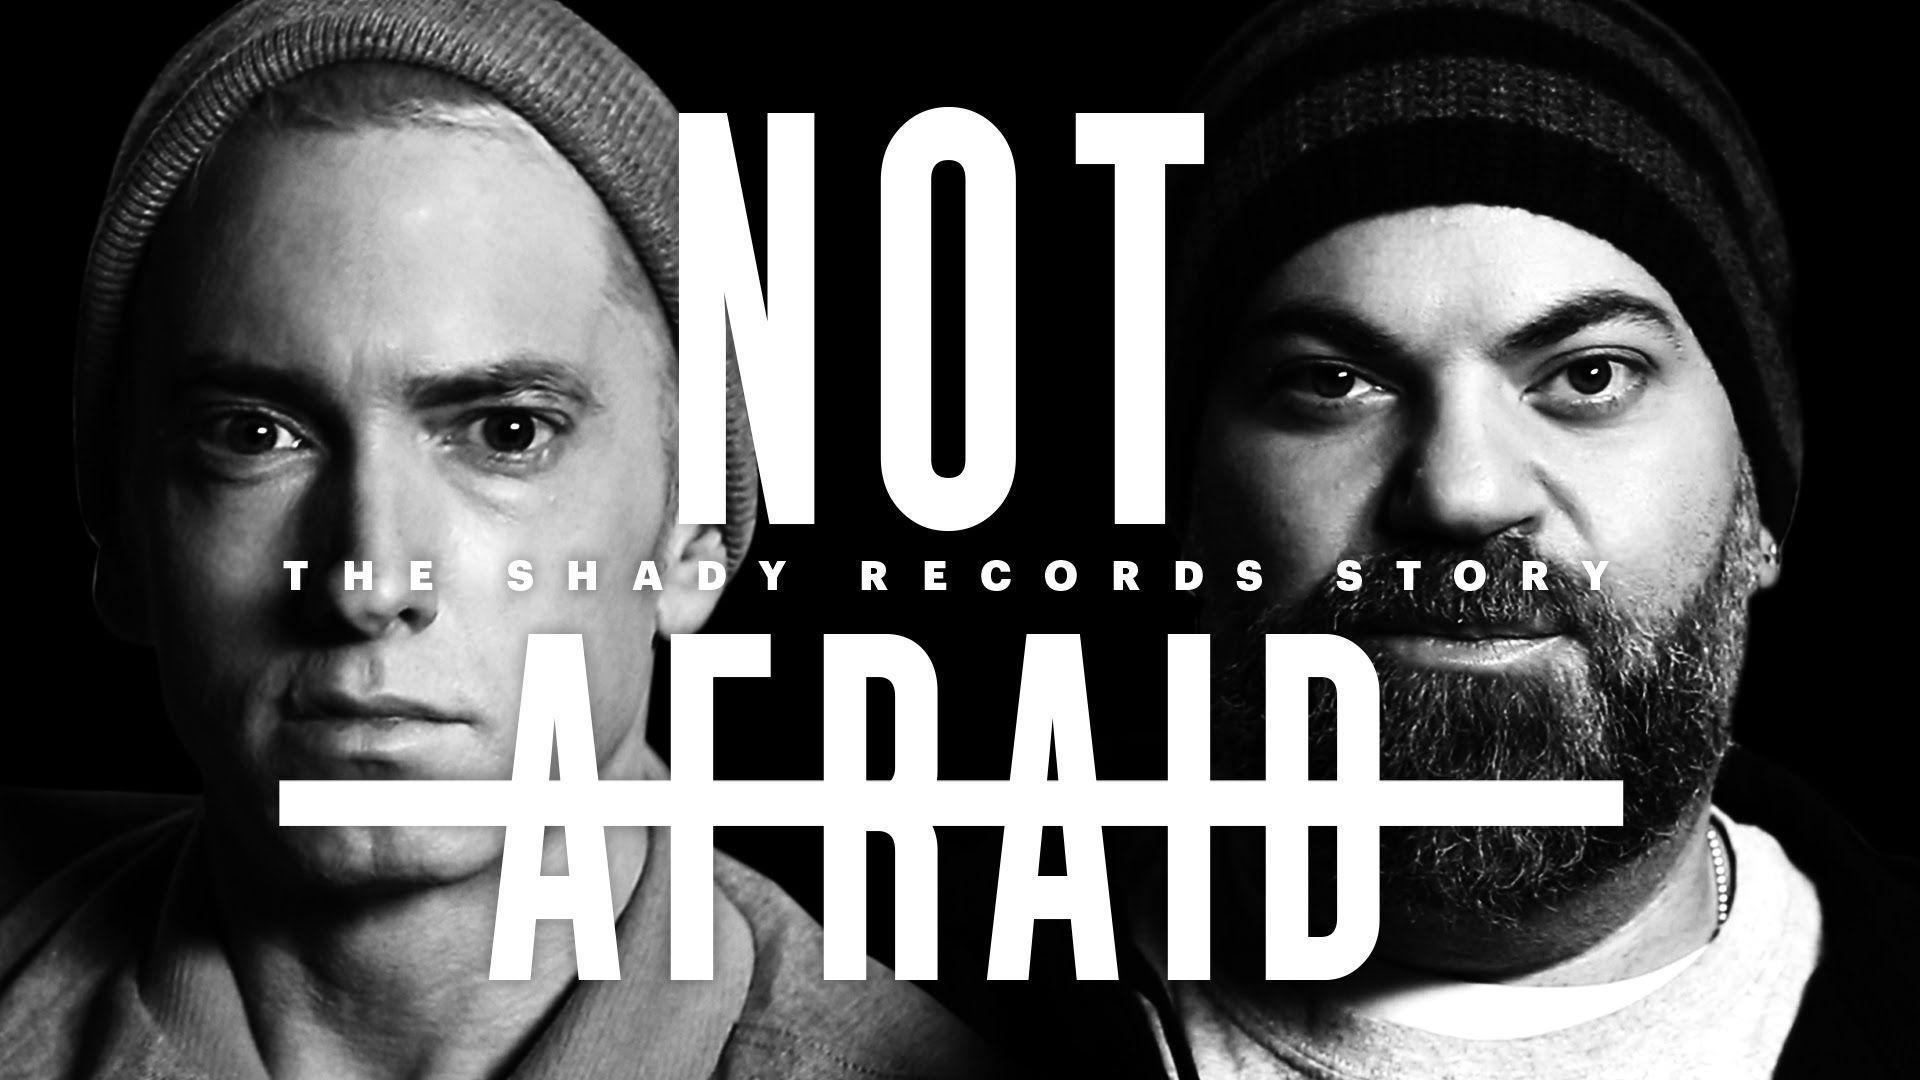 Not Afraid: The Shady Records Story Ft. Eminem, 50 Cent, & Dr. Dre